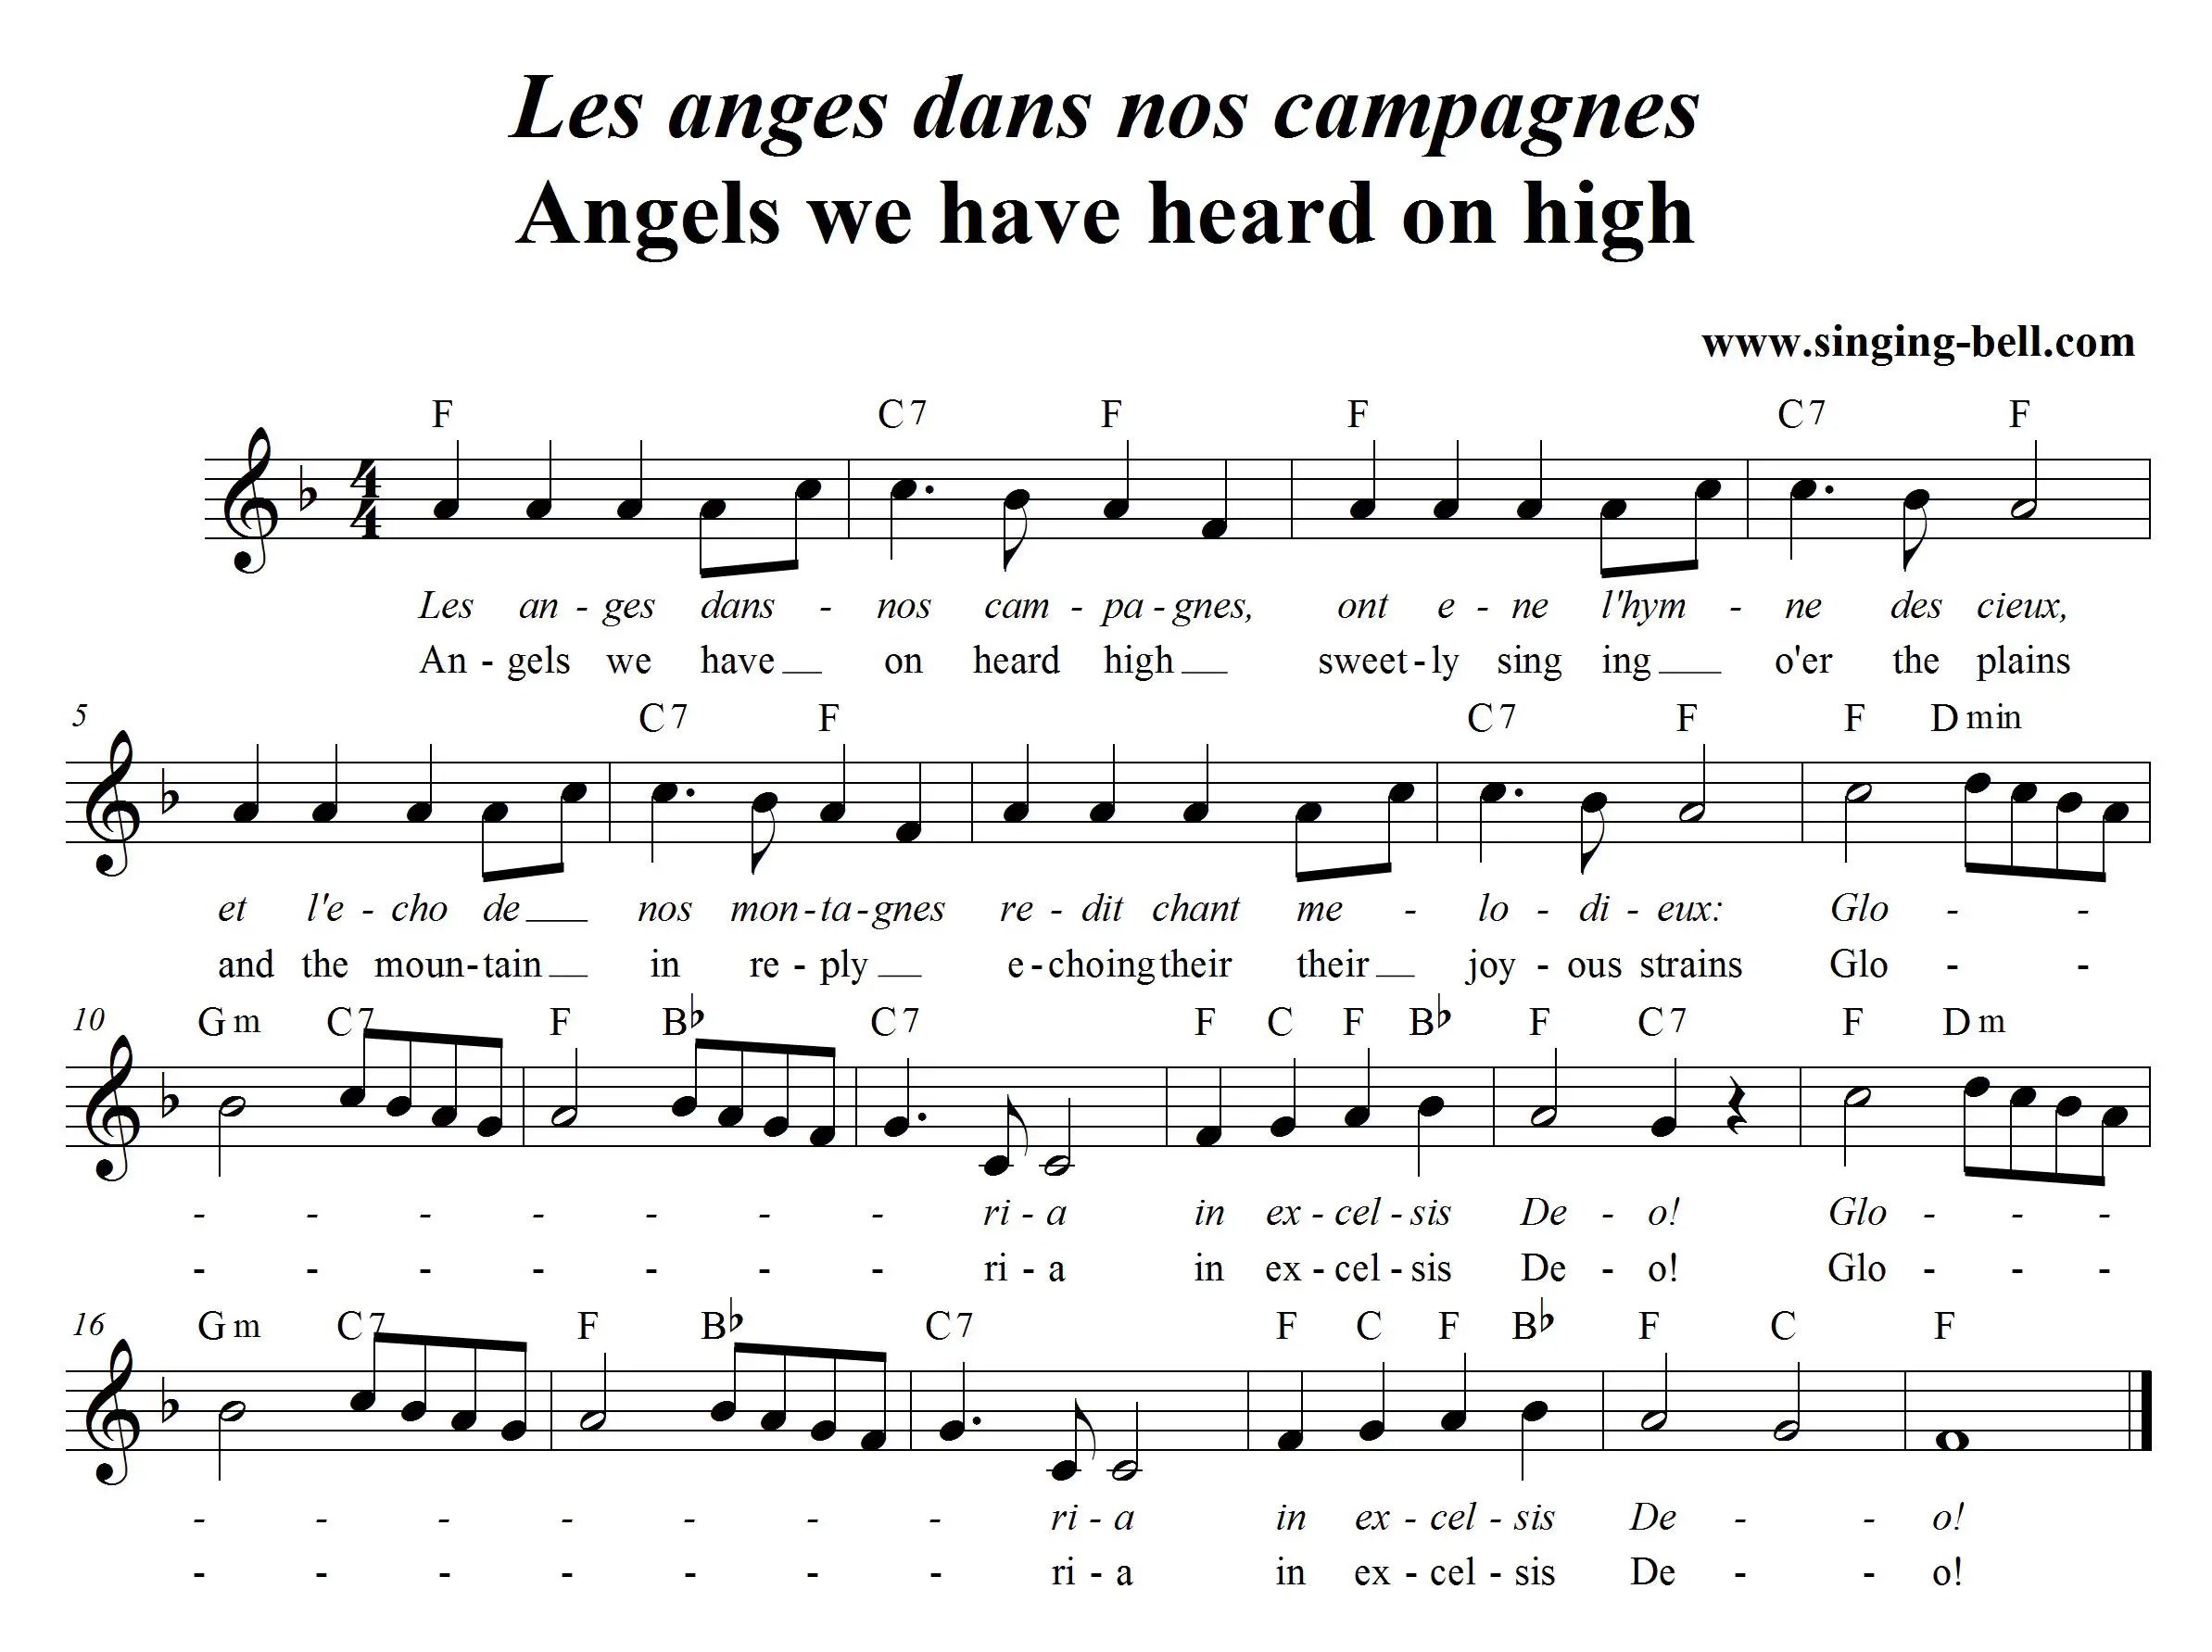 Angels we have heard on high (Les anges dans nos campagnes)_score